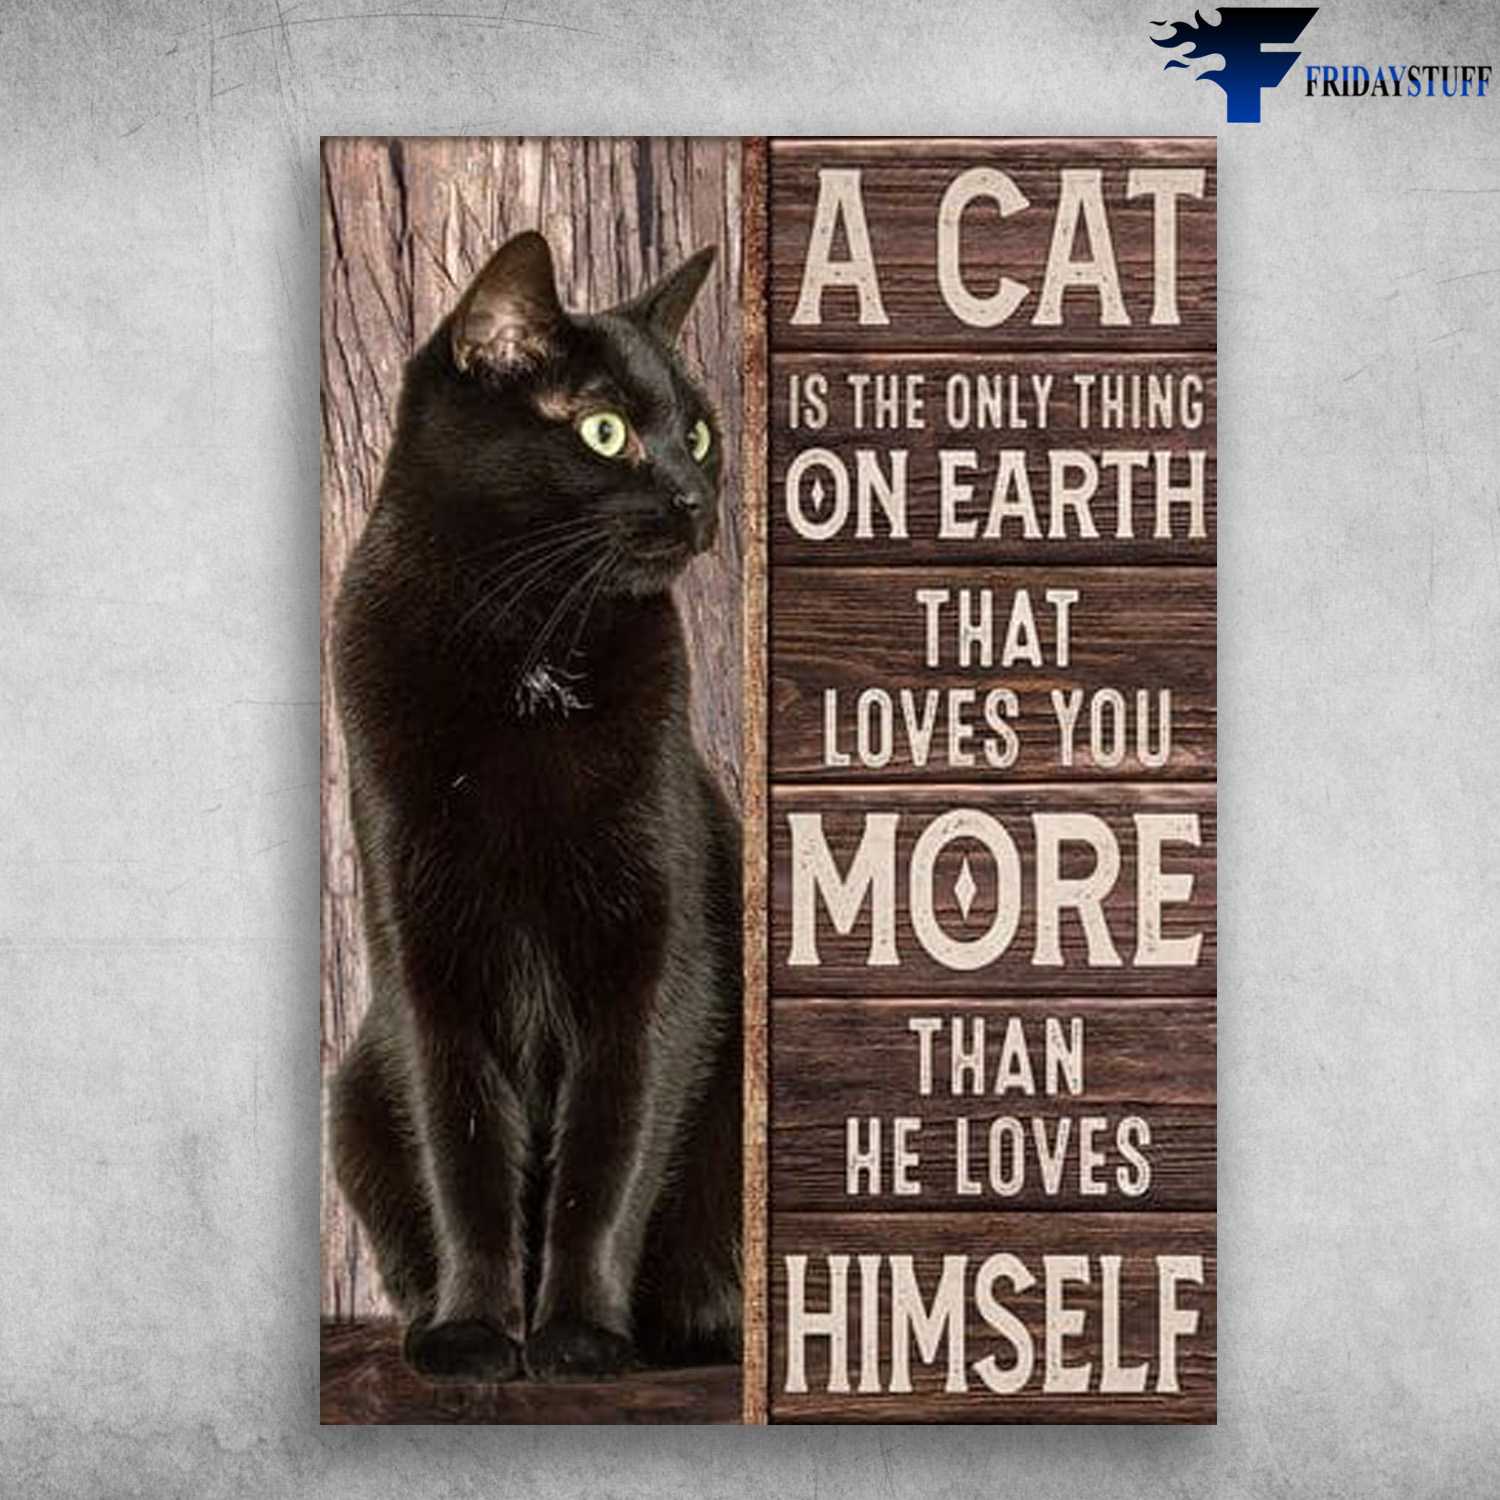 Black Cat Poster, Black Cat, A Cat Is The Only Thing On Earth, That Loves You More Than He Loves Himself